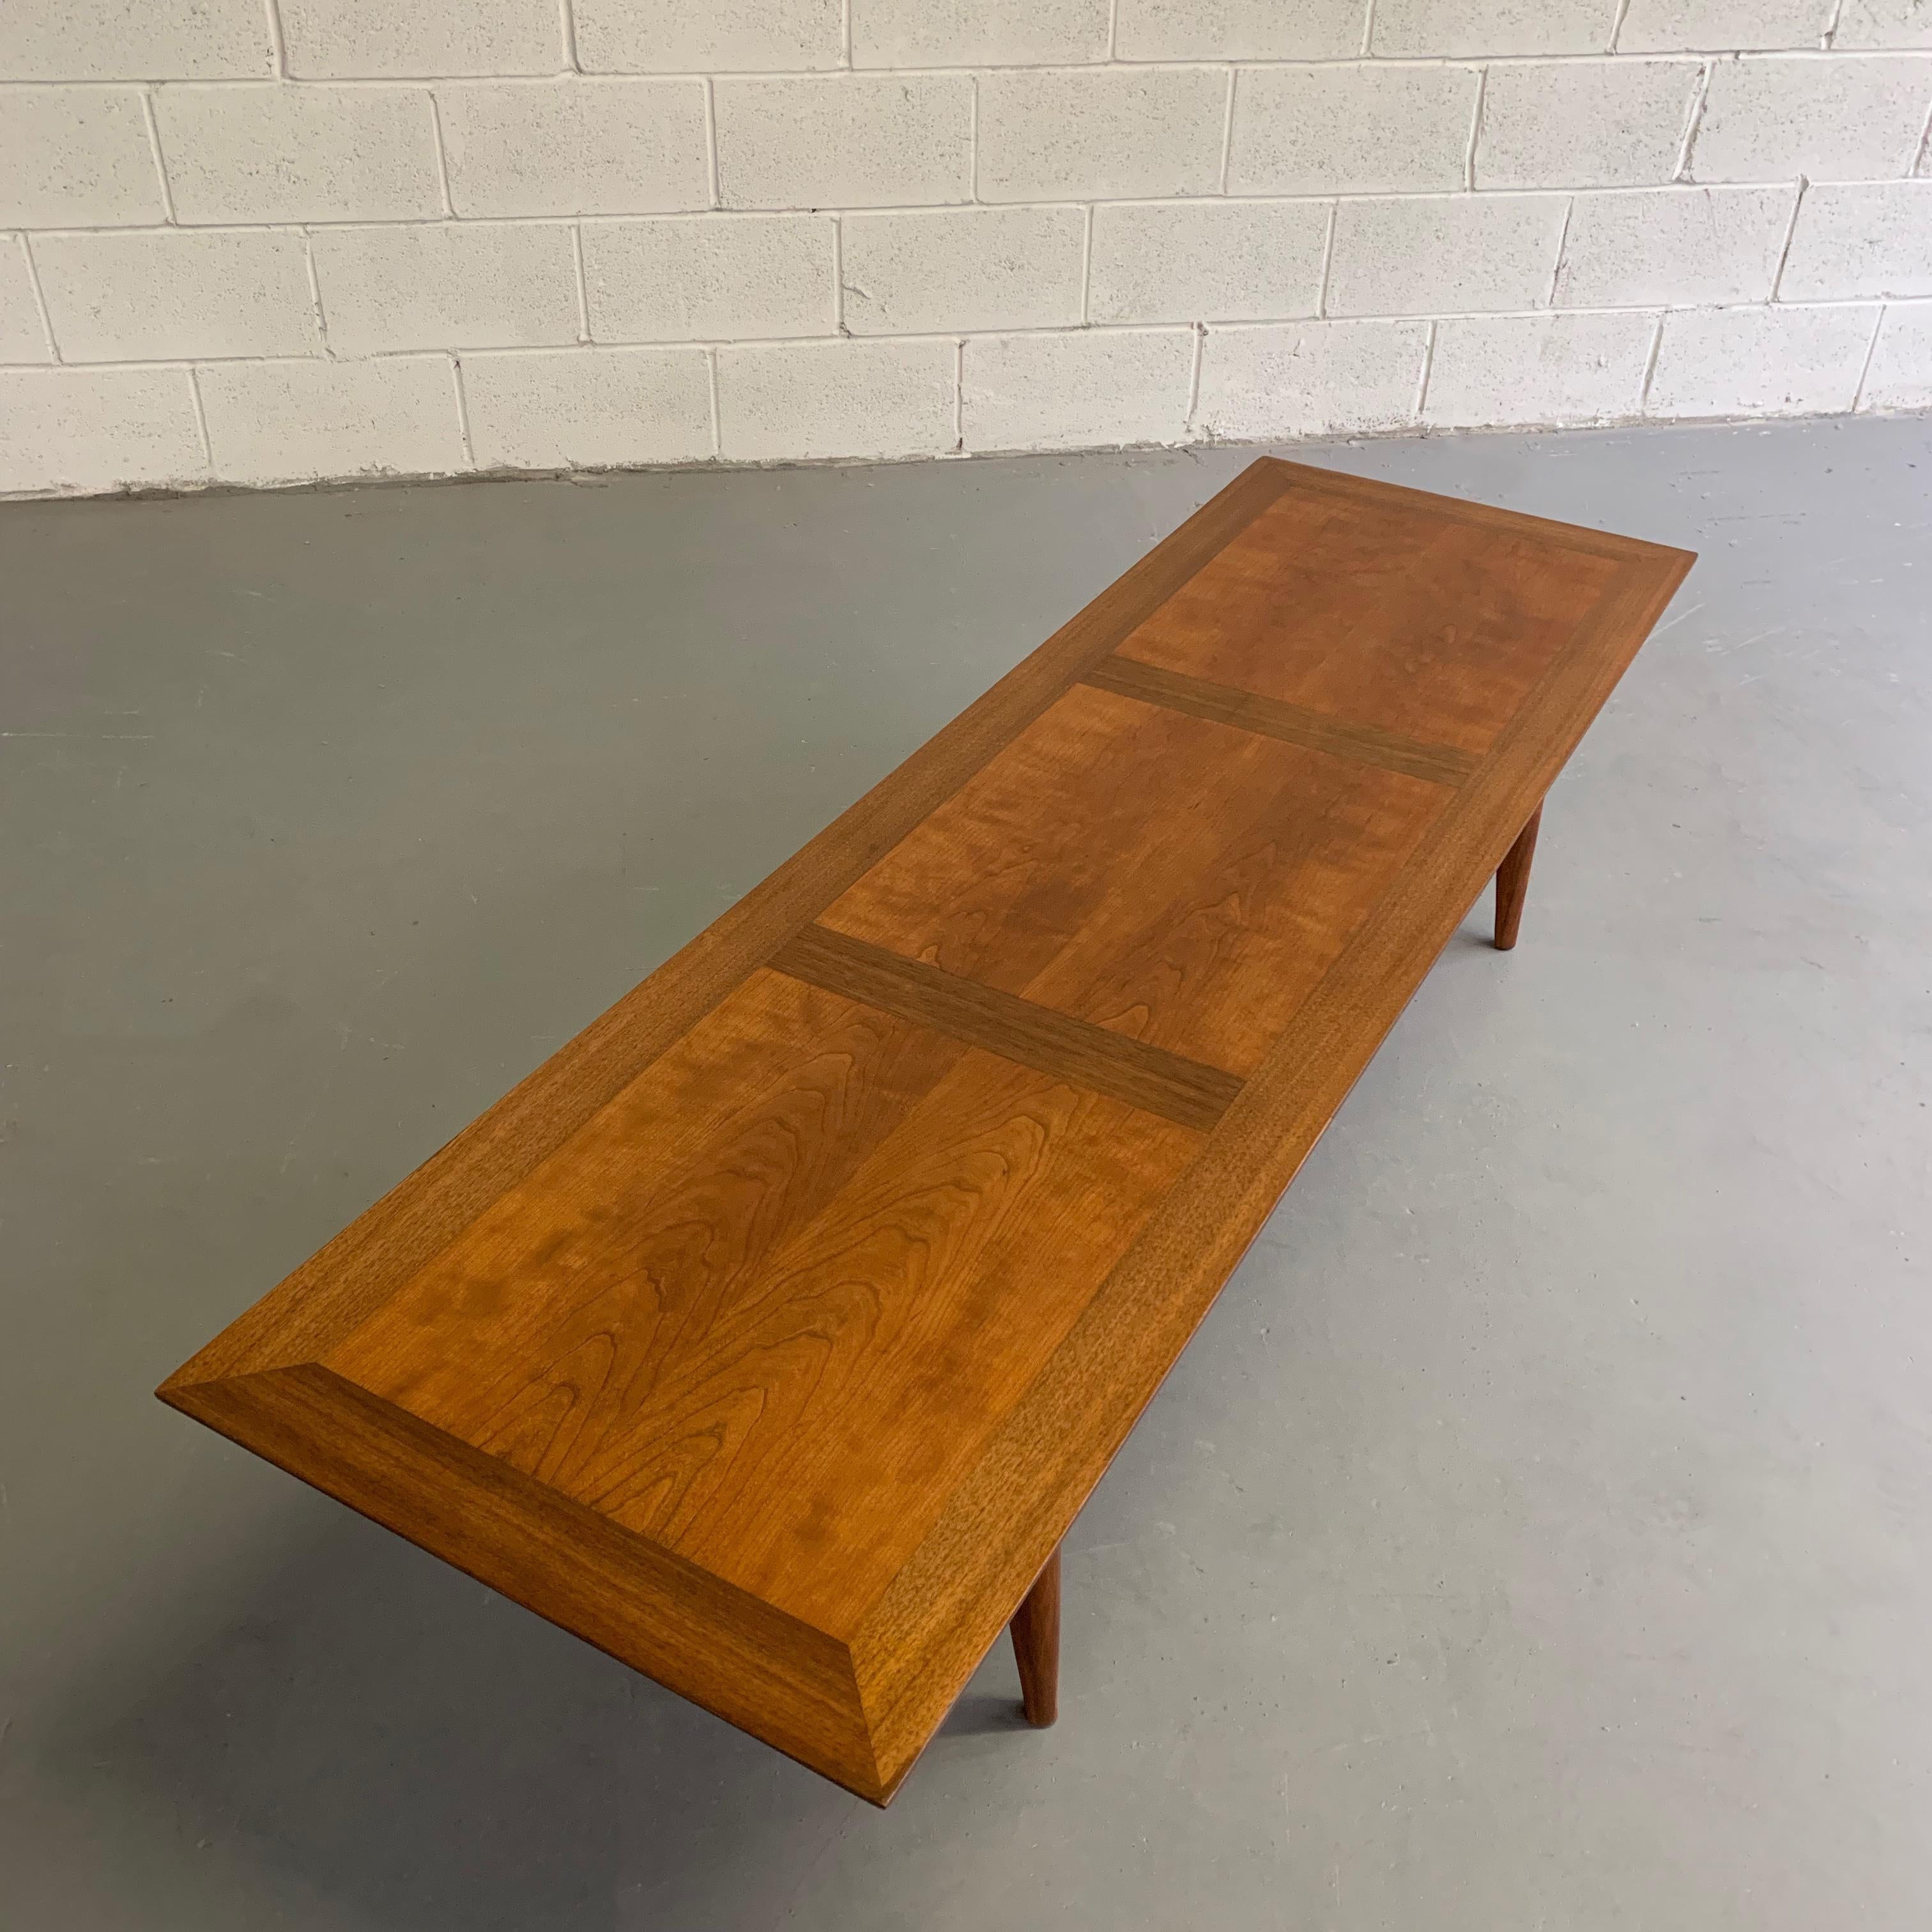 American Mid-Century Modern Cherry and Walnut Floating Coffee Table by John Stuart